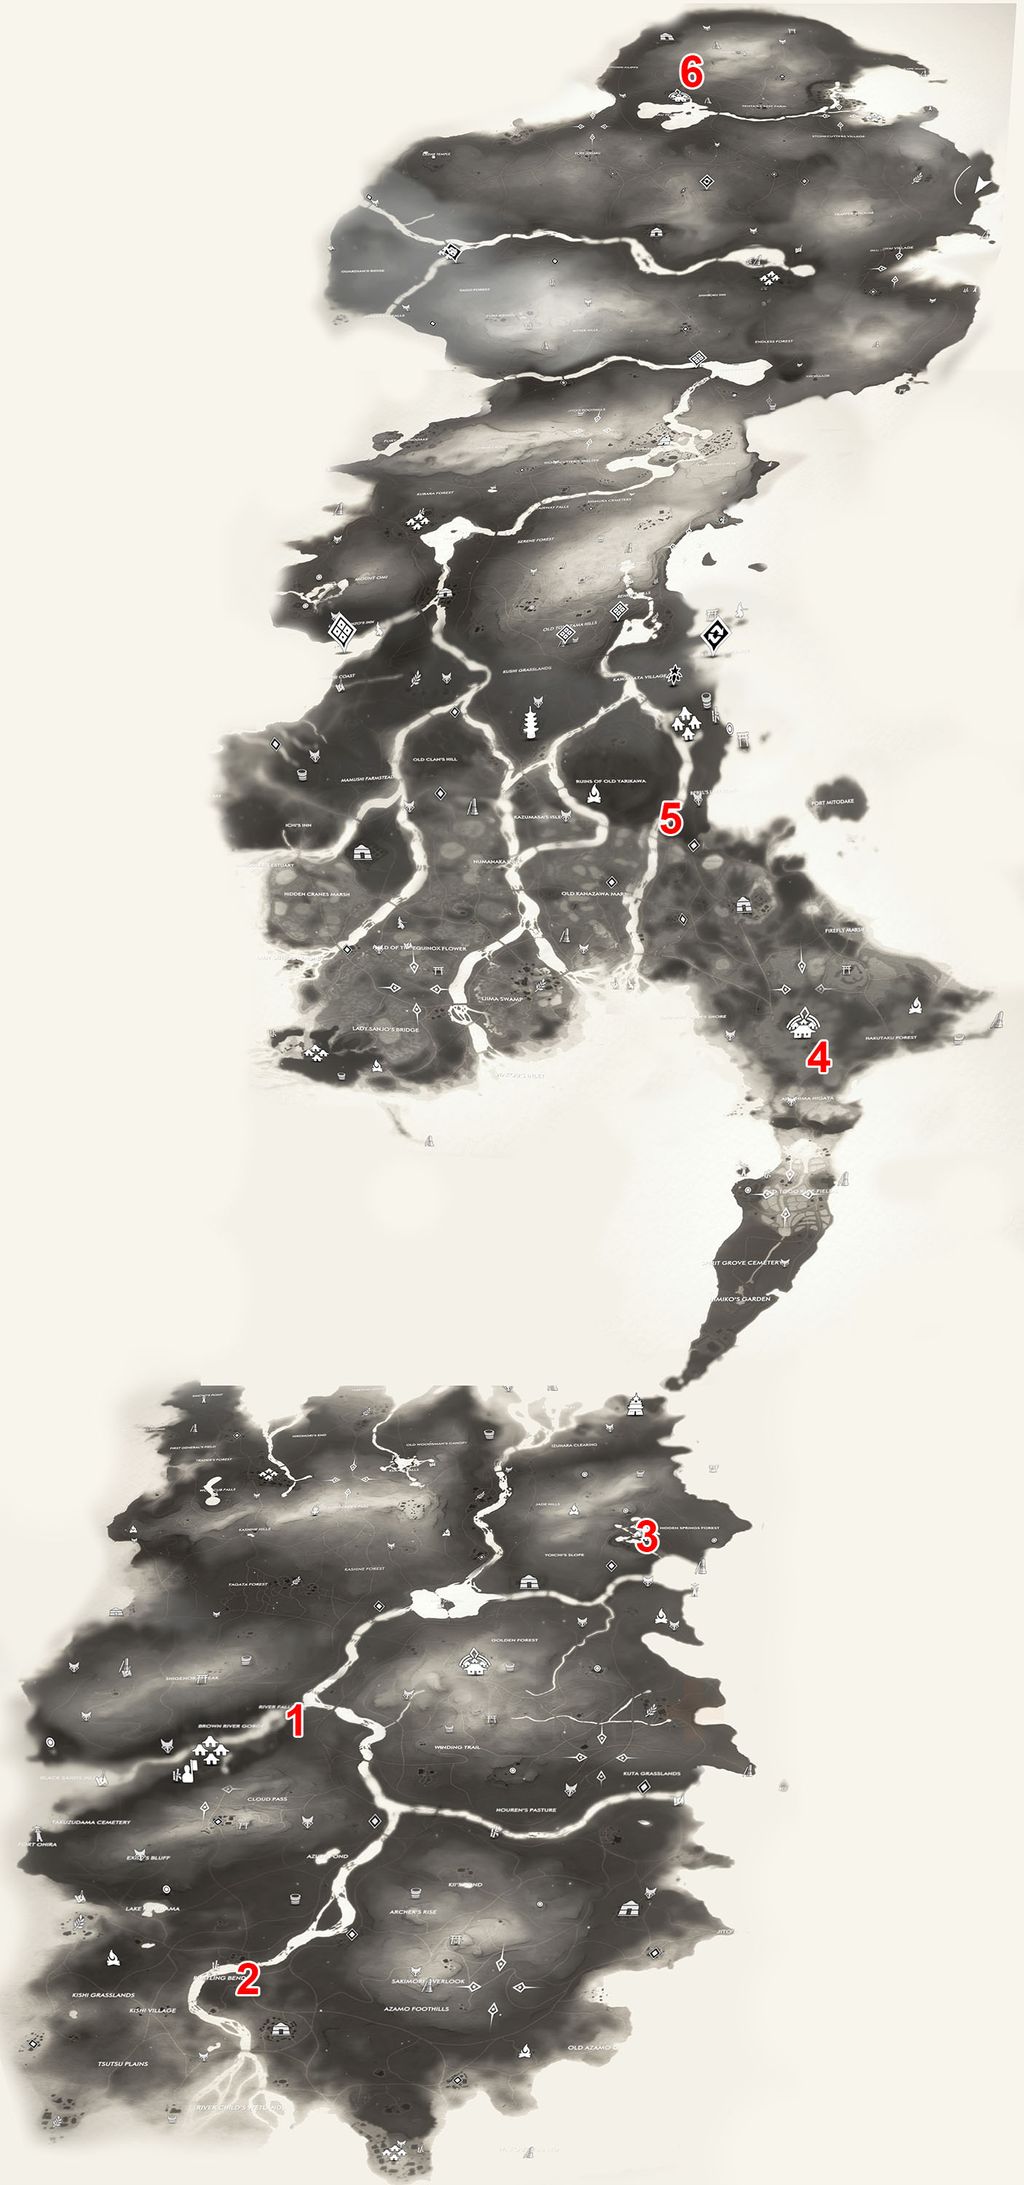 hot springs ghost of tsushima map